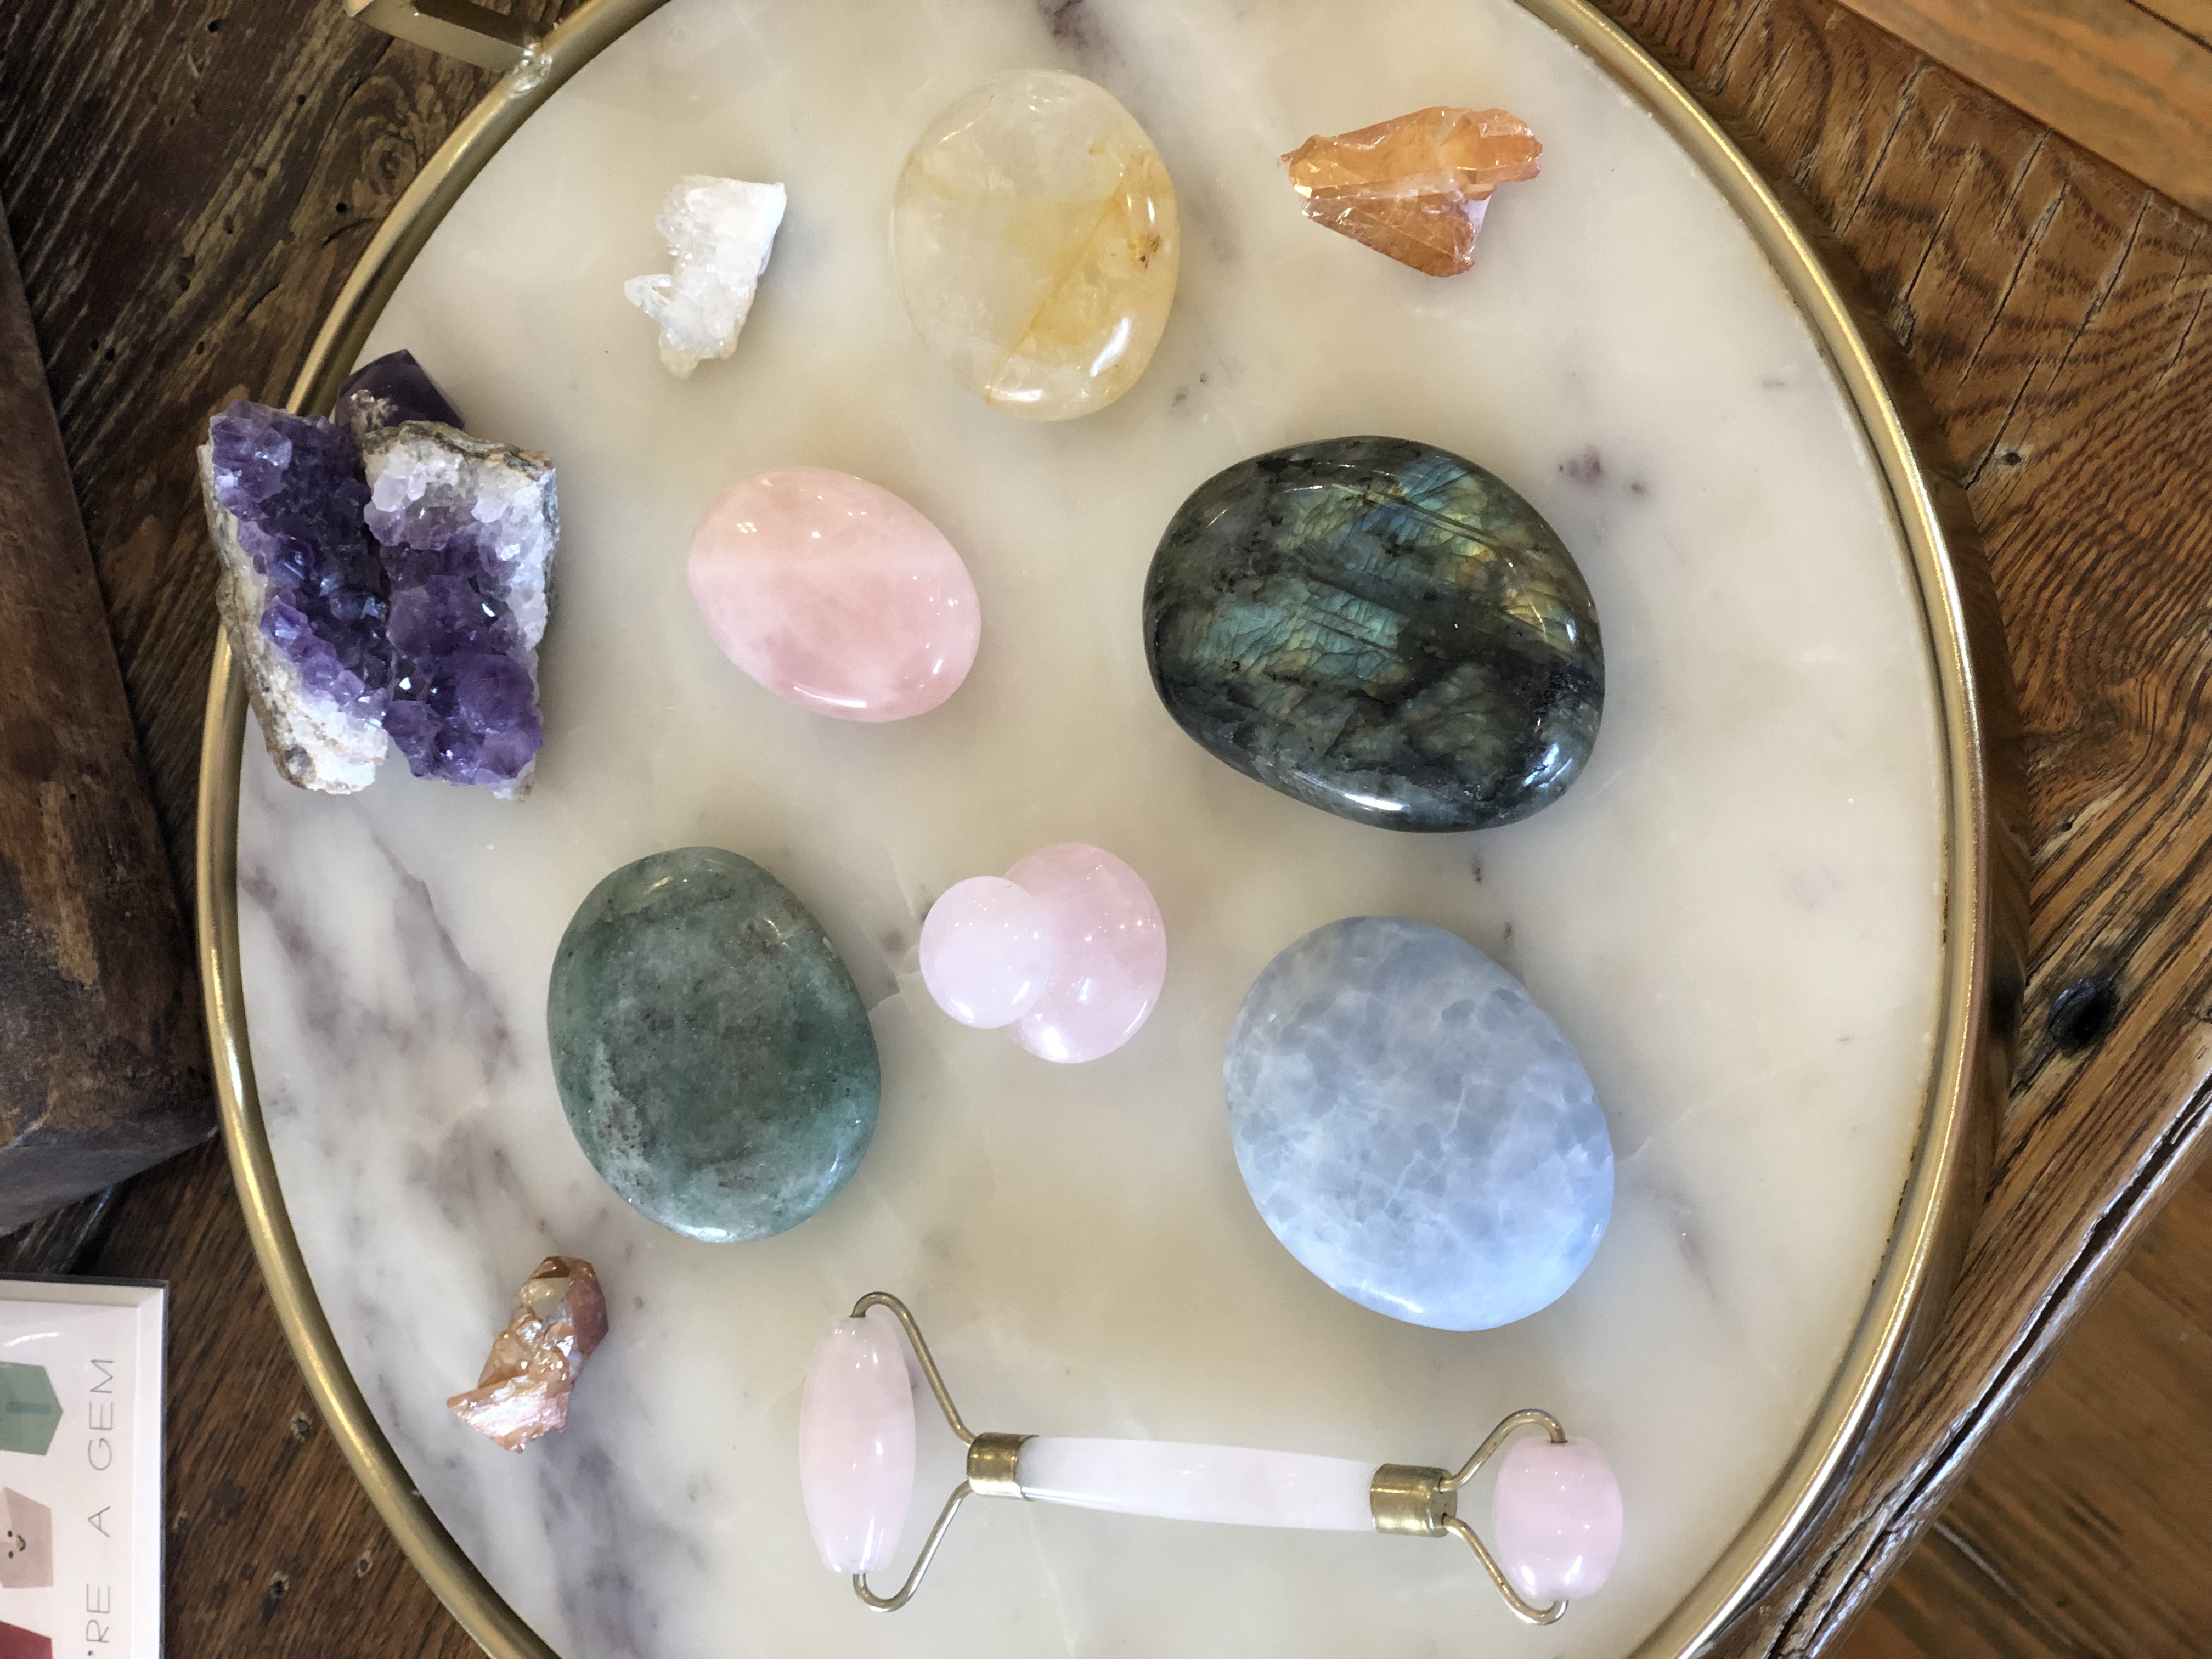 "At first I was drawn to gemstones just for their simple elegance. But when I looked deeper, I realized each different stone holds a very powerful message," says spa owner Gen Obolensky.